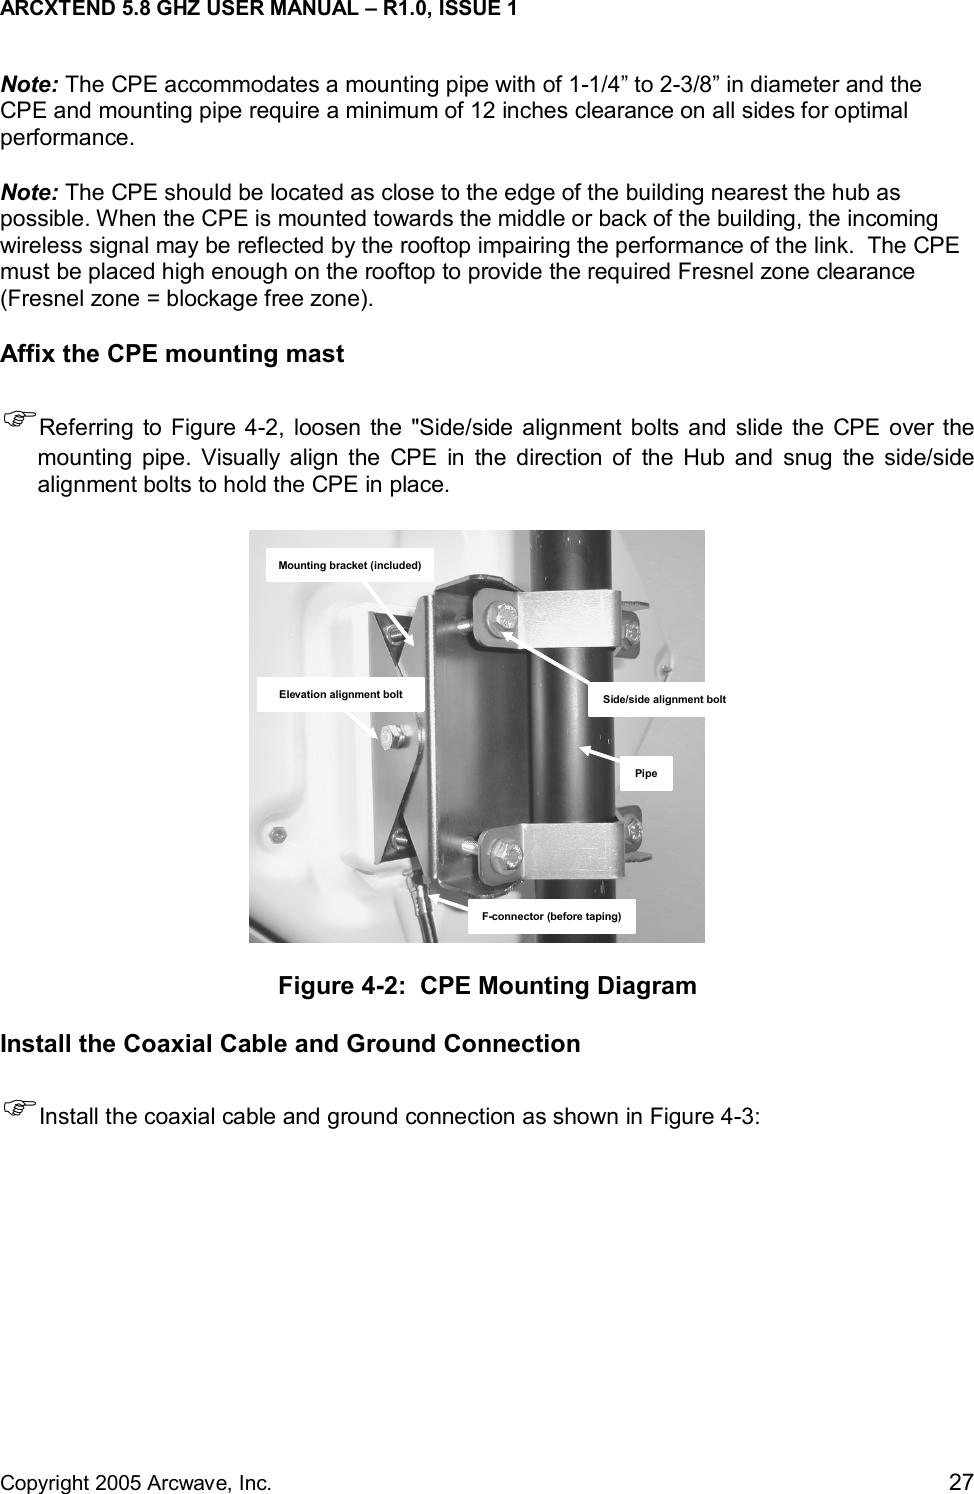 ARCXTEND 5.8 GHZ USER MANUAL – R1.0, ISSUE 1  Copyright 2005 Arcwave, Inc.    27 Note: The CPE accommodates a mounting pipe with of 1-1/4” to 2-3/8” in diameter and the CPE and mounting pipe require a minimum of 12 inches clearance on all sides for optimal performance.  Note: The CPE should be located as close to the edge of the building nearest the hub as possible. When the CPE is mounted towards the middle or back of the building, the incoming wireless signal may be reflected by the rooftop impairing the performance of the link.  The CPE must be placed high enough on the rooftop to provide the required Fresnel zone clearance (Fresnel zone = blockage free zone). Affix the CPE mounting mast )Referring to Figure 4-2, loosen the &quot;Side/side alignment bolts and slide the CPE over the mounting pipe. Visually align the CPE in the direction of the Hub and snug the side/side alignment bolts to hold the CPE in place. Mounting bracket (included)Elevation alignment boltF-connector (before taping)PipeSide/side alignment bolt Figure 4-2:  CPE Mounting Diagram Install the Coaxial Cable and Ground Connection )Install the coaxial cable and ground connection as shown in Figure 4-3: 